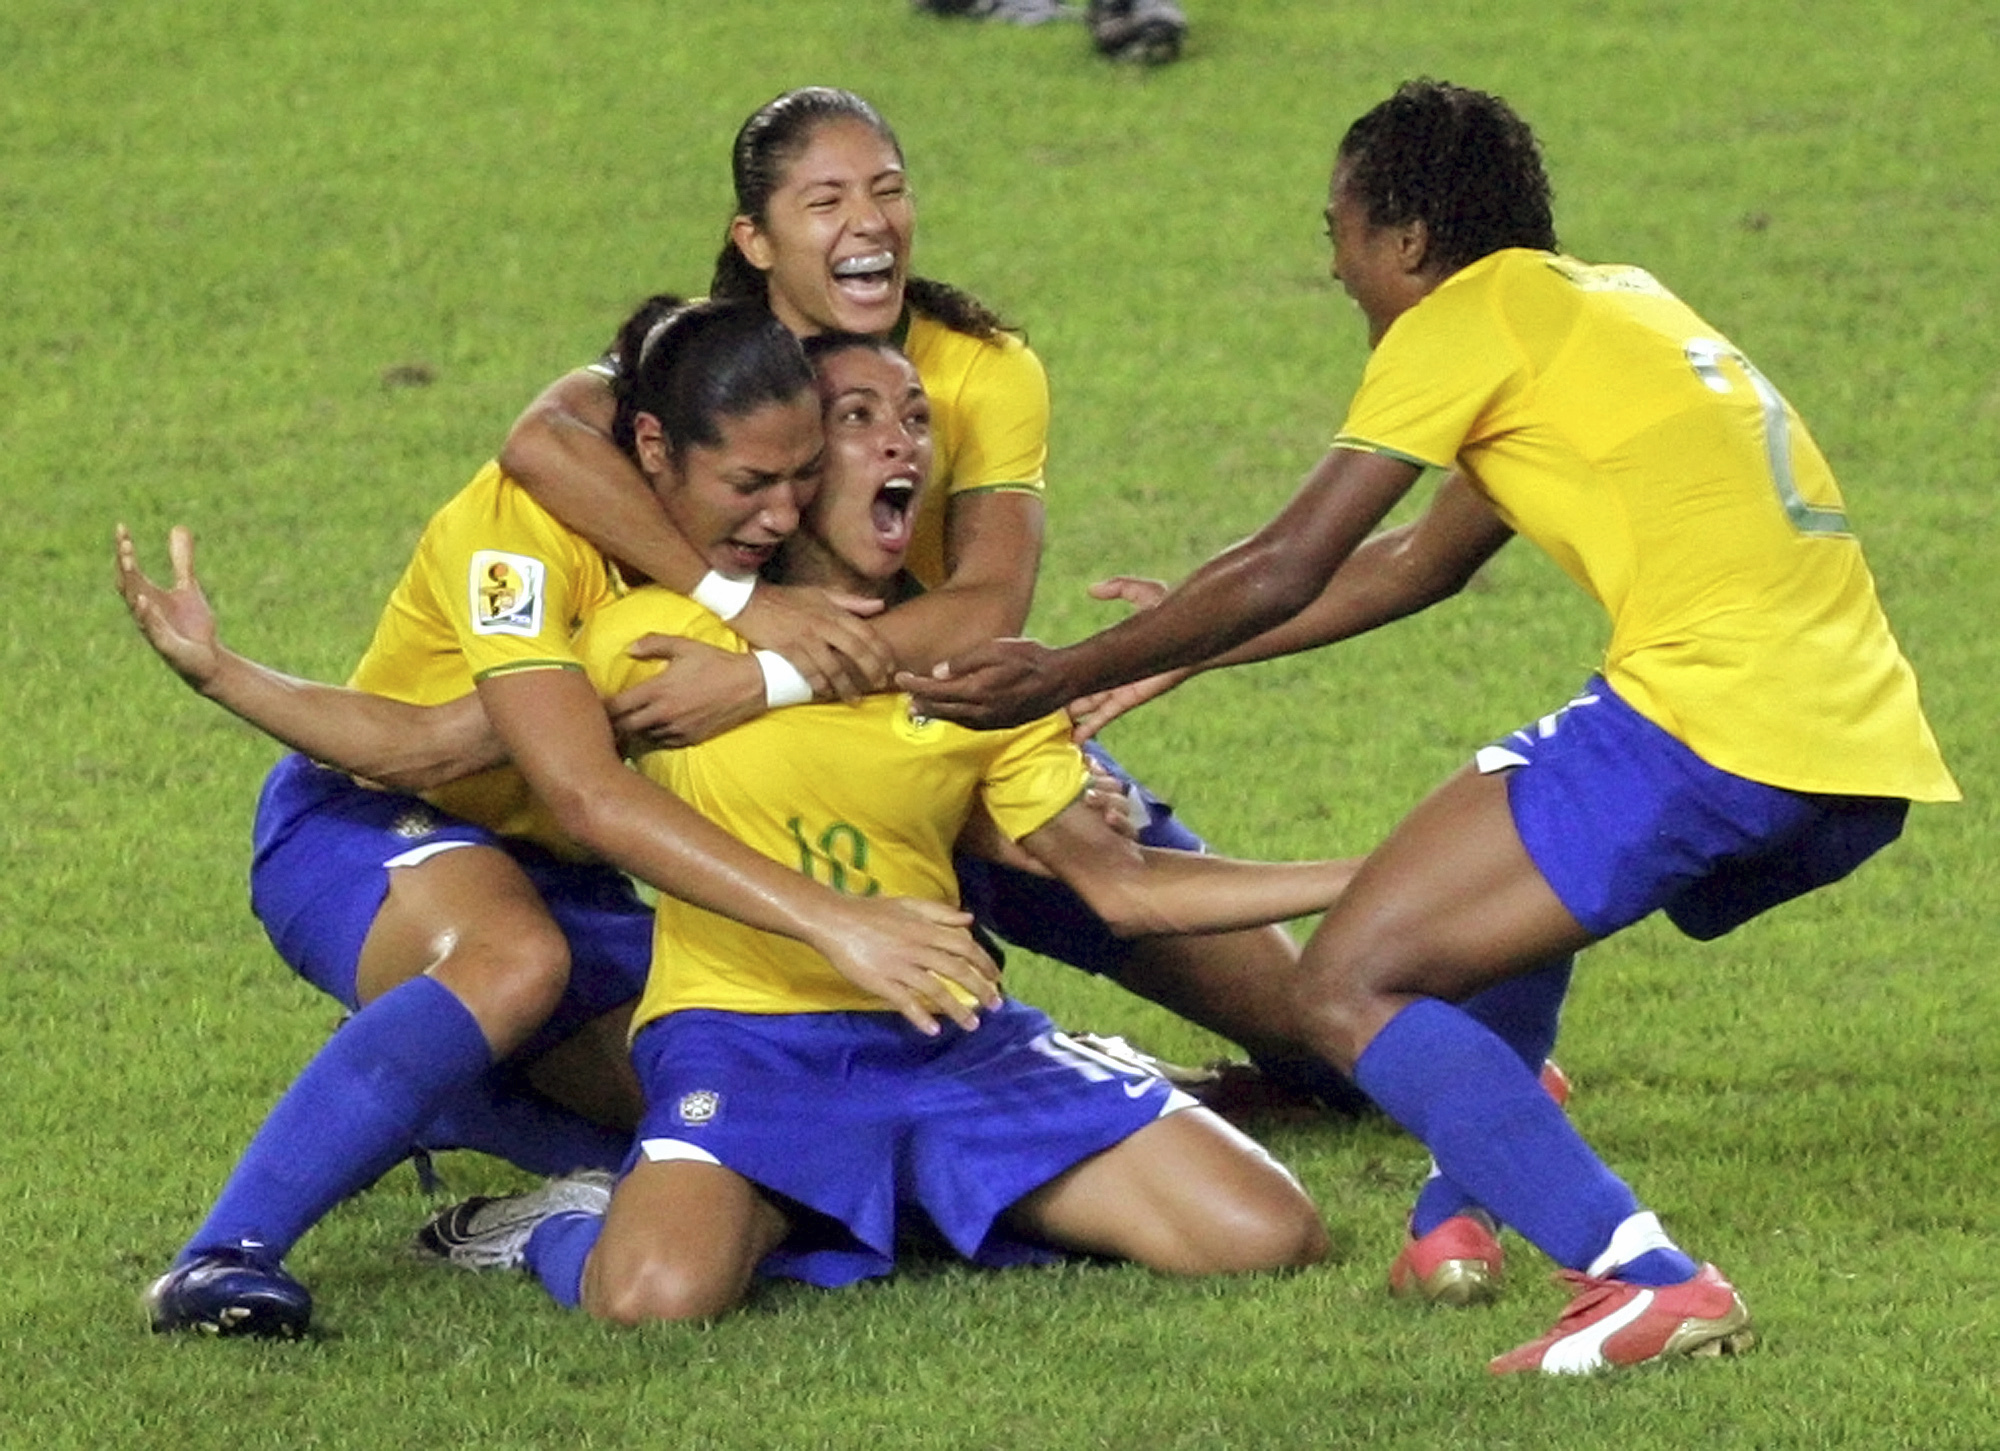 Marta says this will be her final year with Brazil’s women’s national